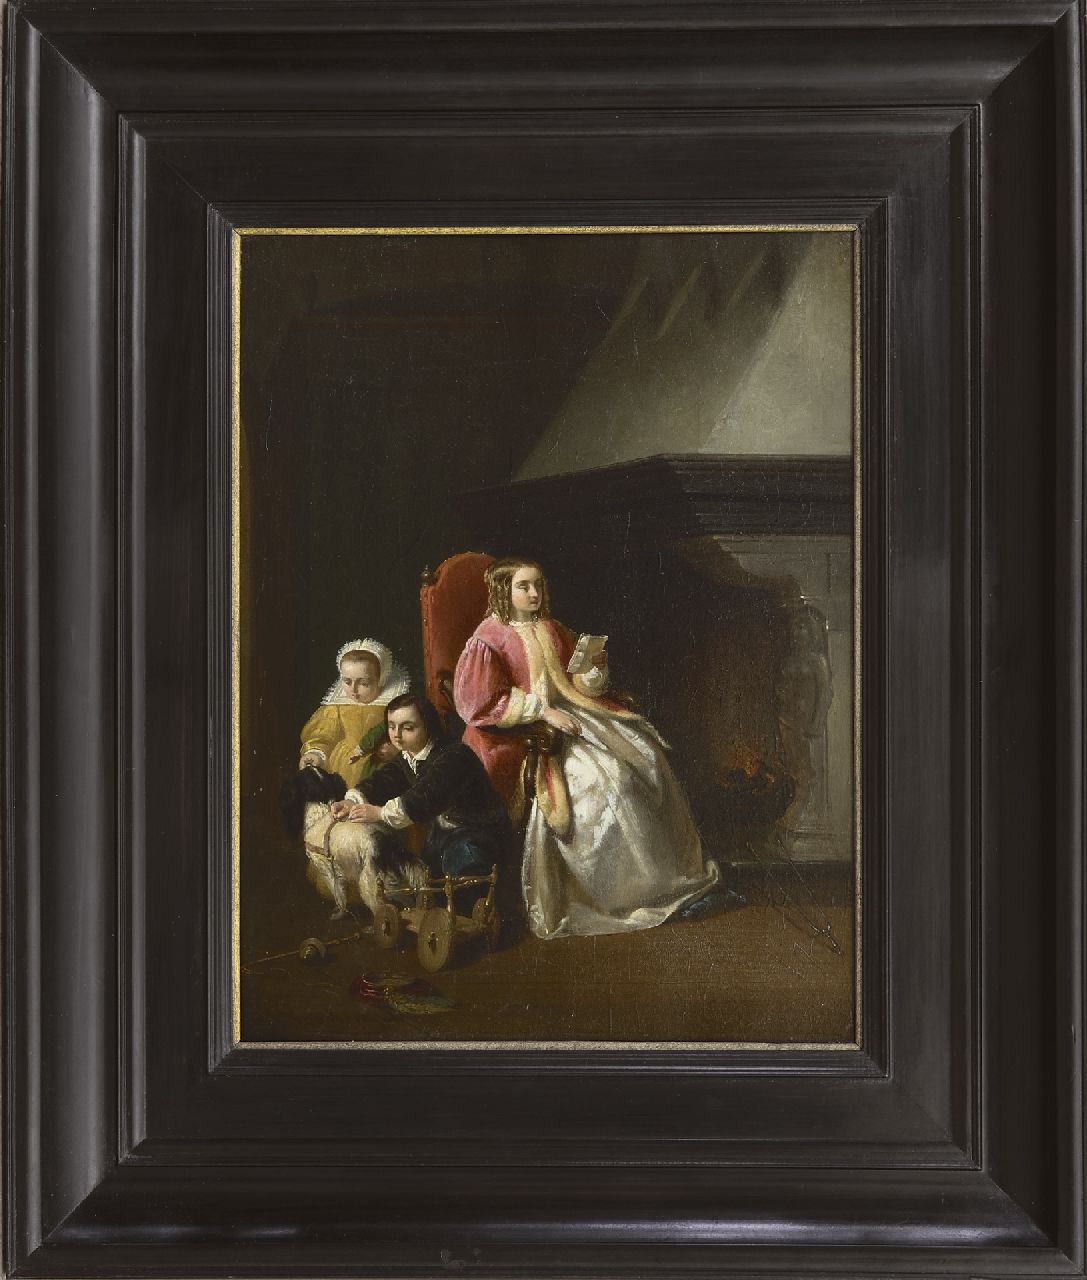 Vaarberg J.C.  | Joannes Christoffel Vaarberg | Paintings offered for sale | A mother with her children by a fire place, oil on panel 29.5 x 22.6 cm, signed l.l. and dated '60